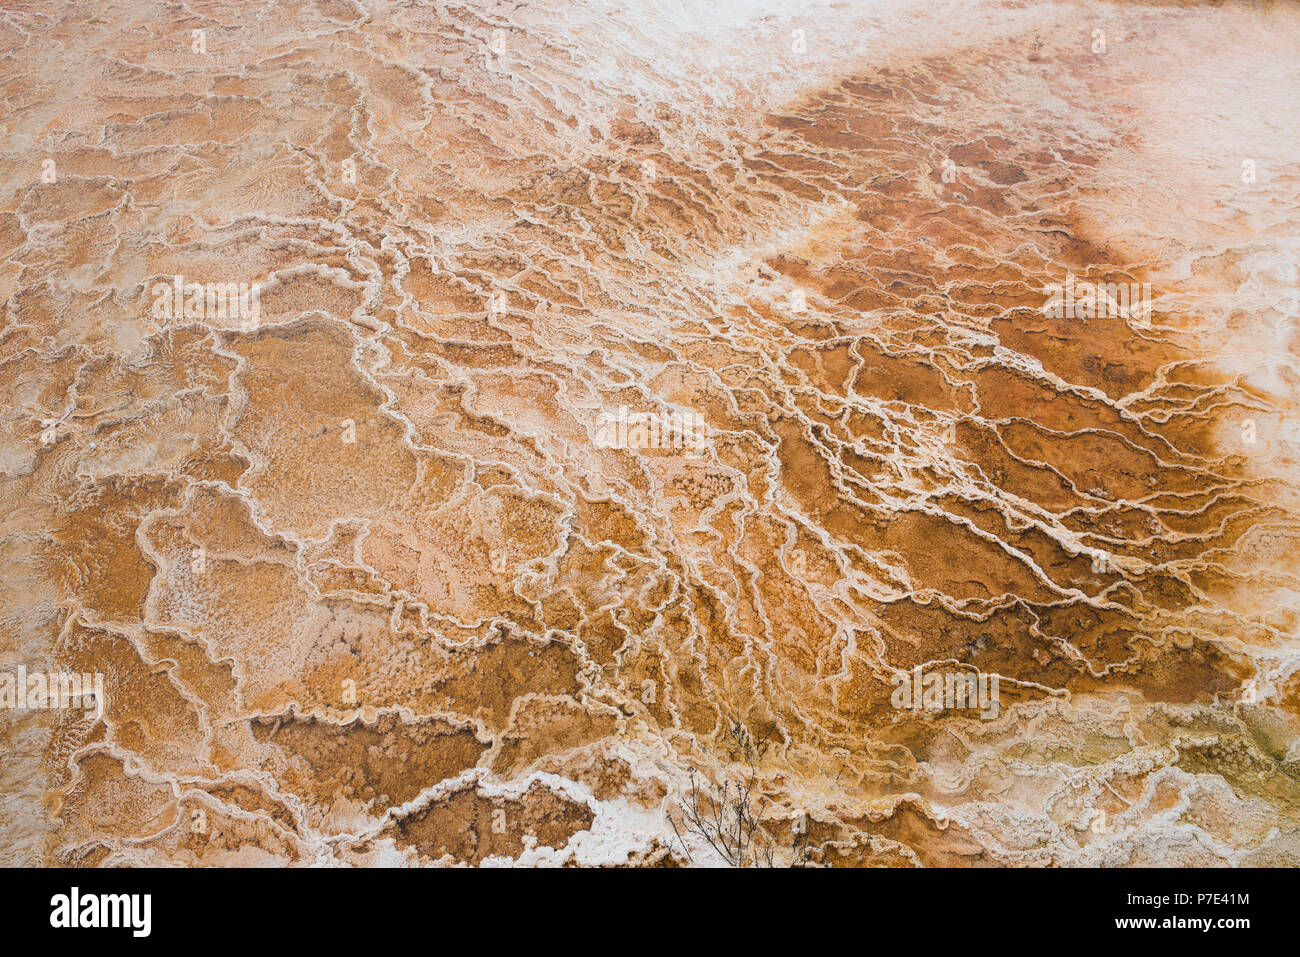 Overhead view of yellow mineral deposit, Yellowstone National Park, Wyoming, USA Stock Photo